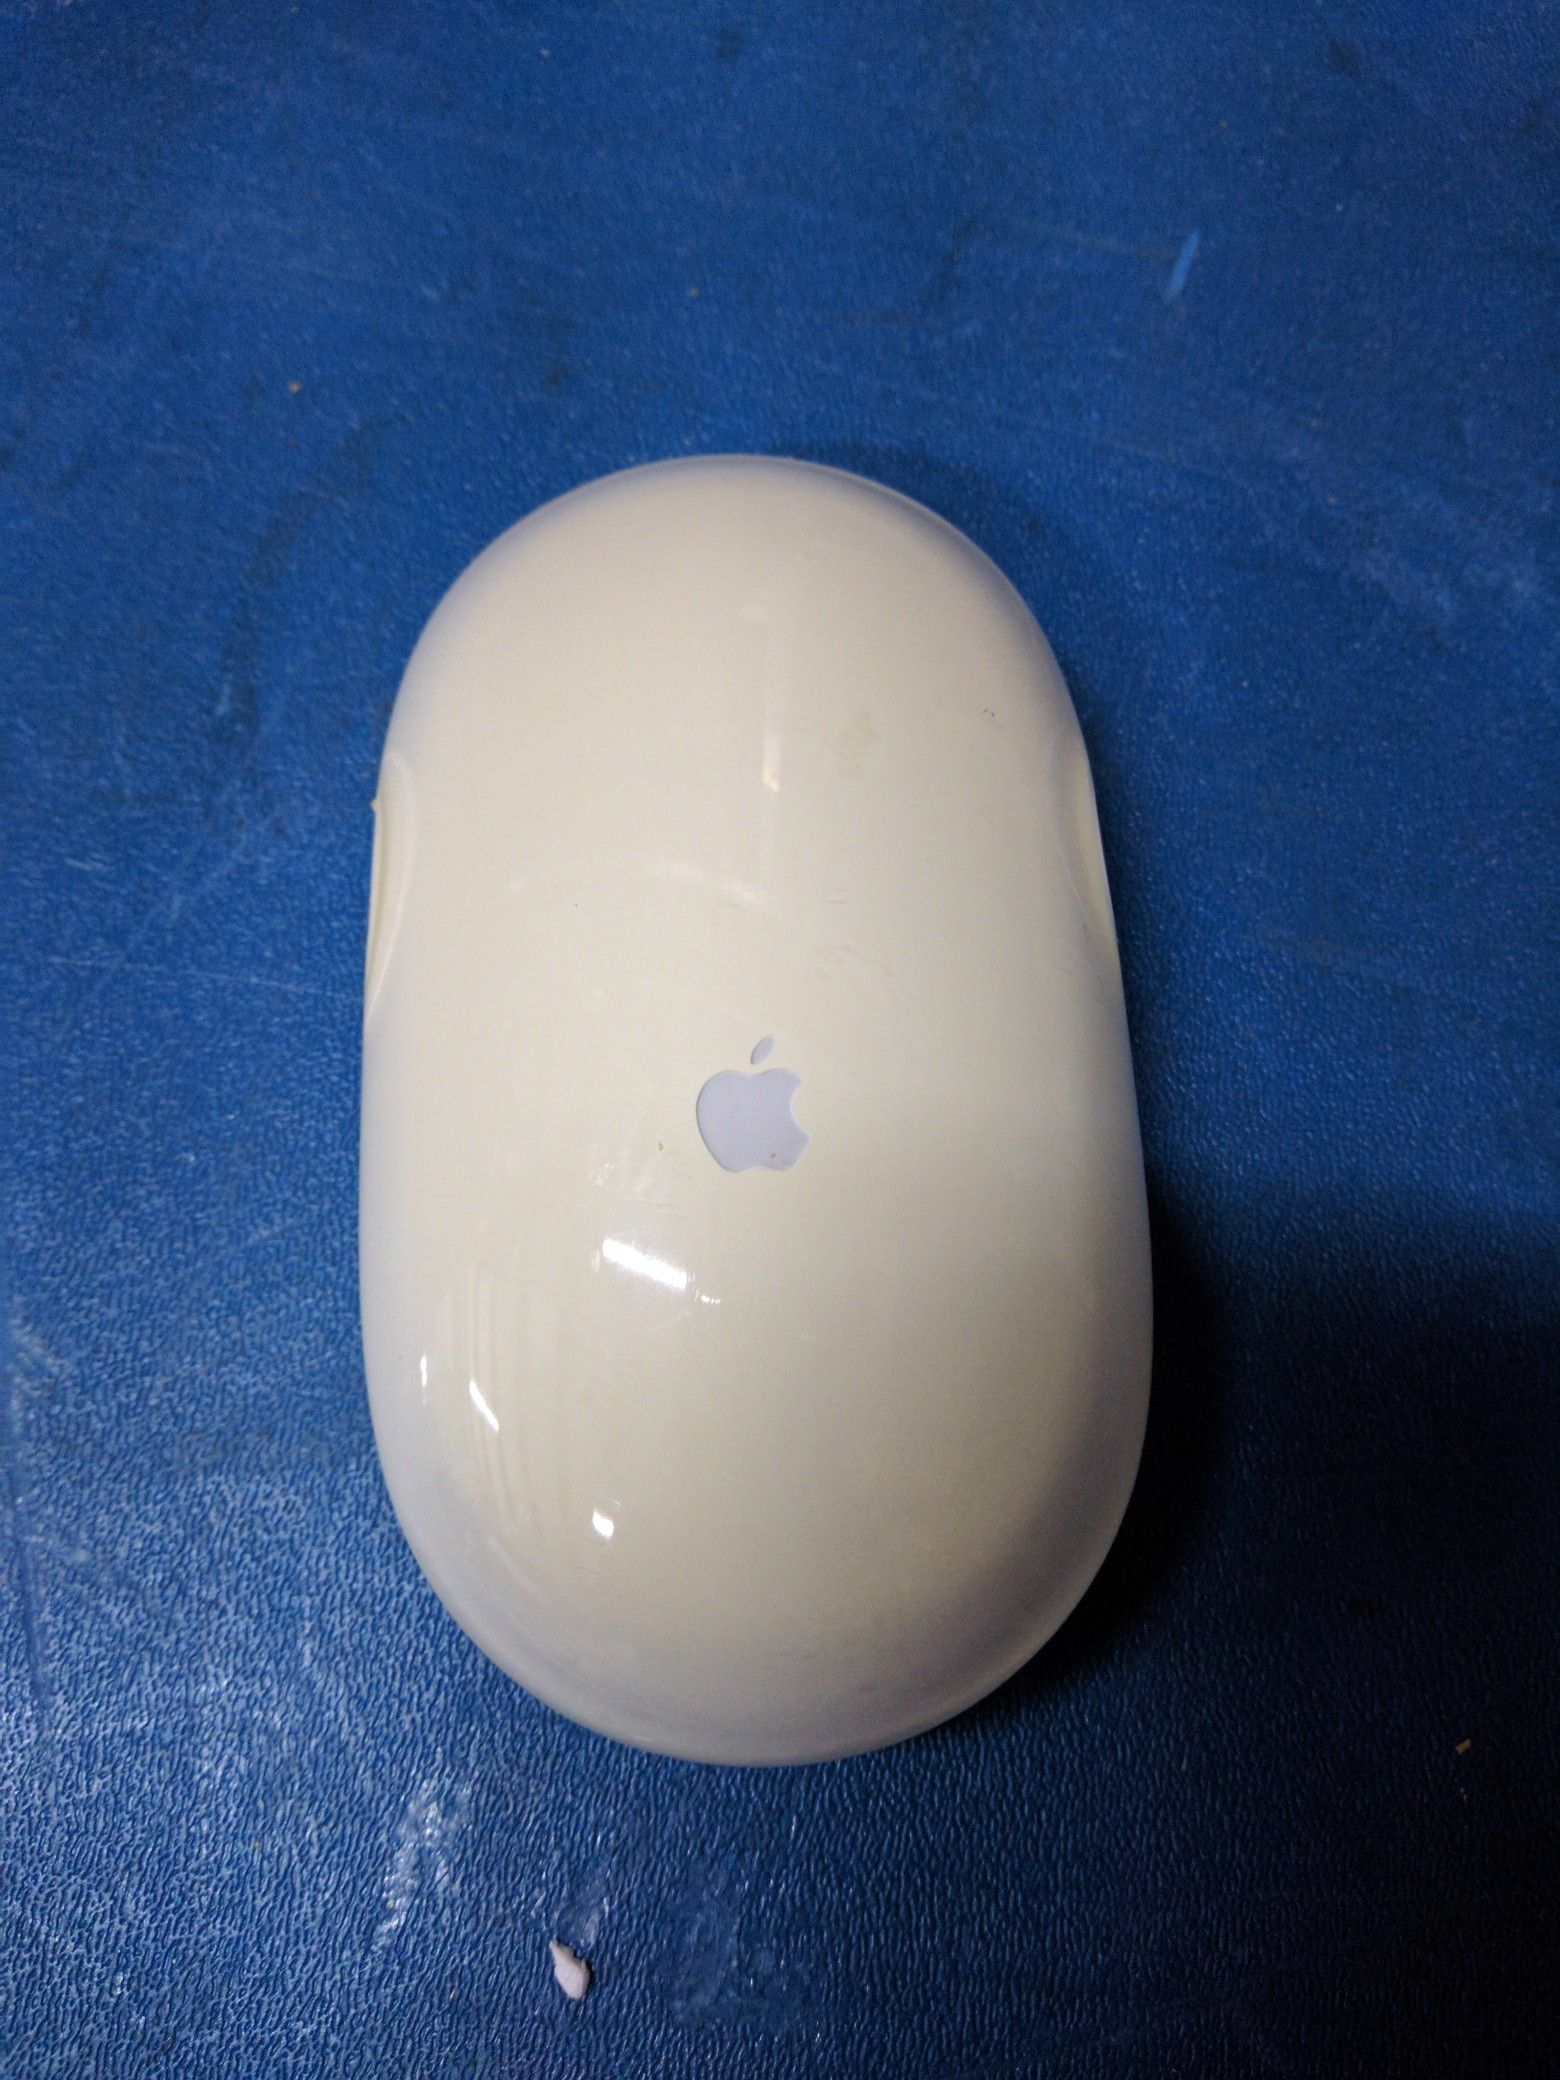 Apple wireless mouse A1015